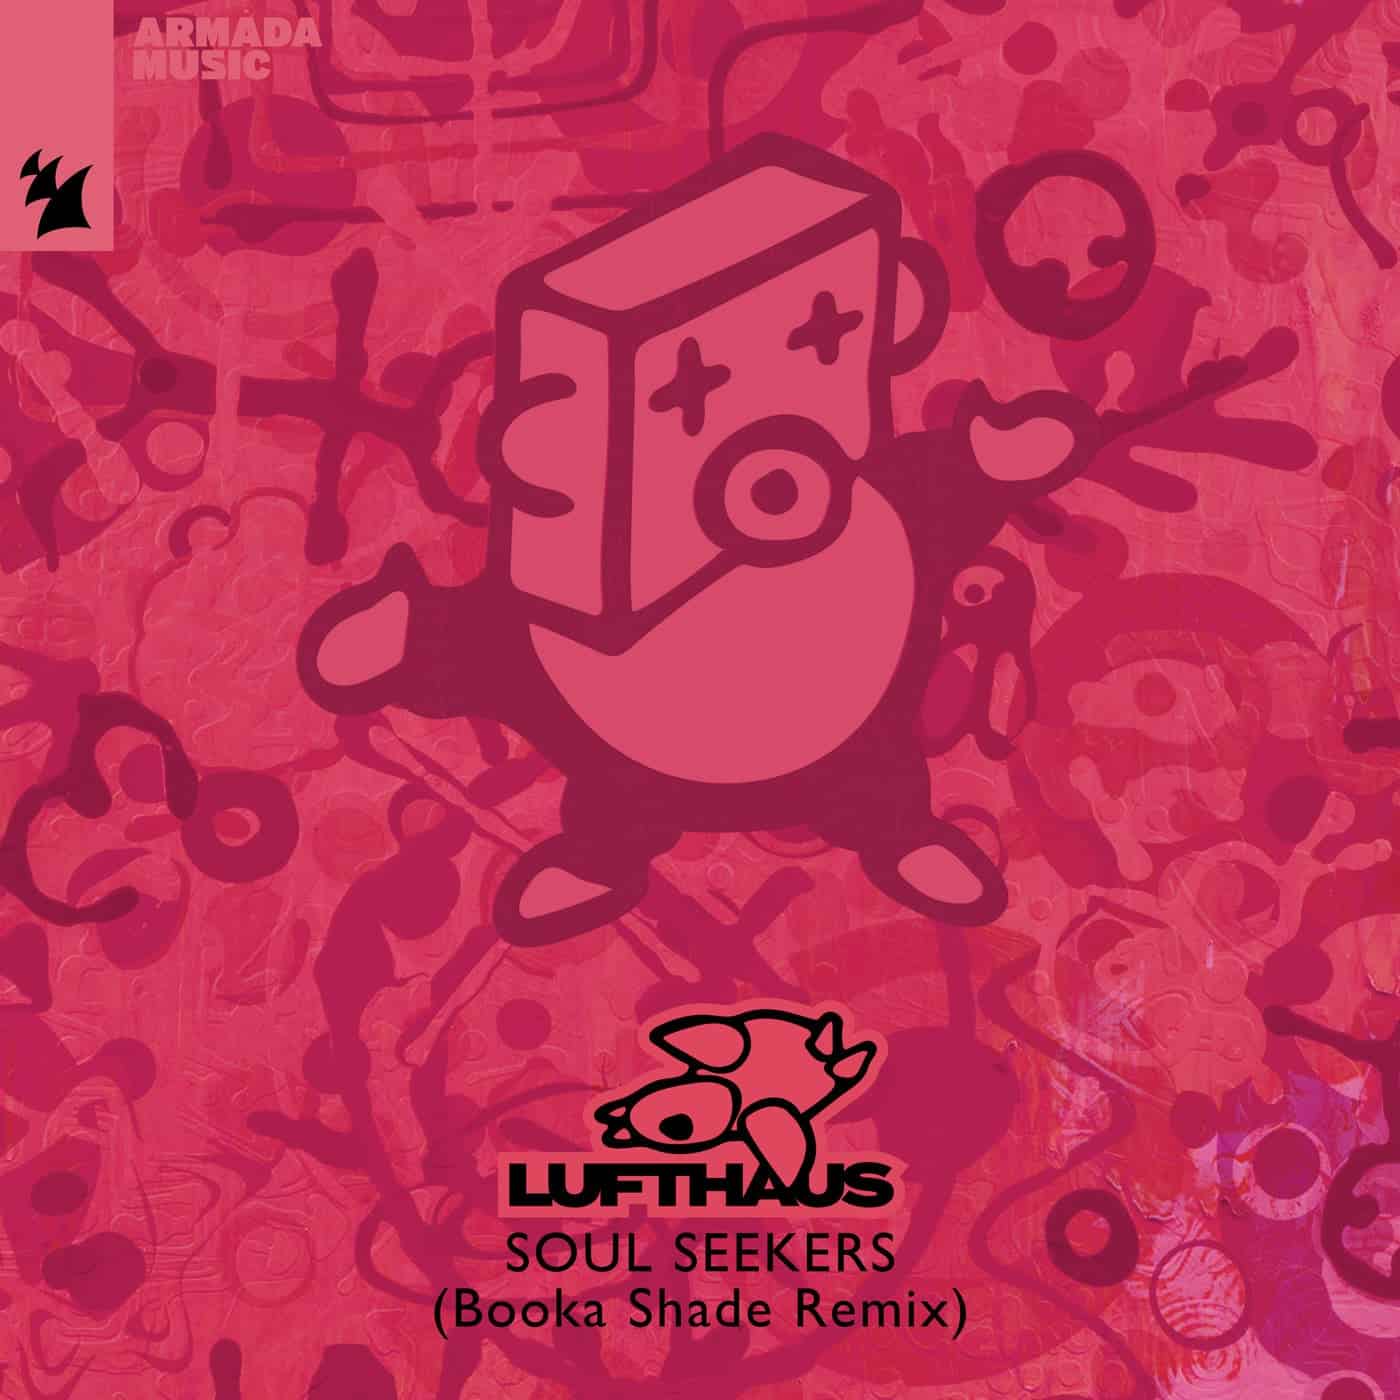 image cover: Lufthaus - Soul Seekers - Booka Shade Remix / ARMAS2284R1